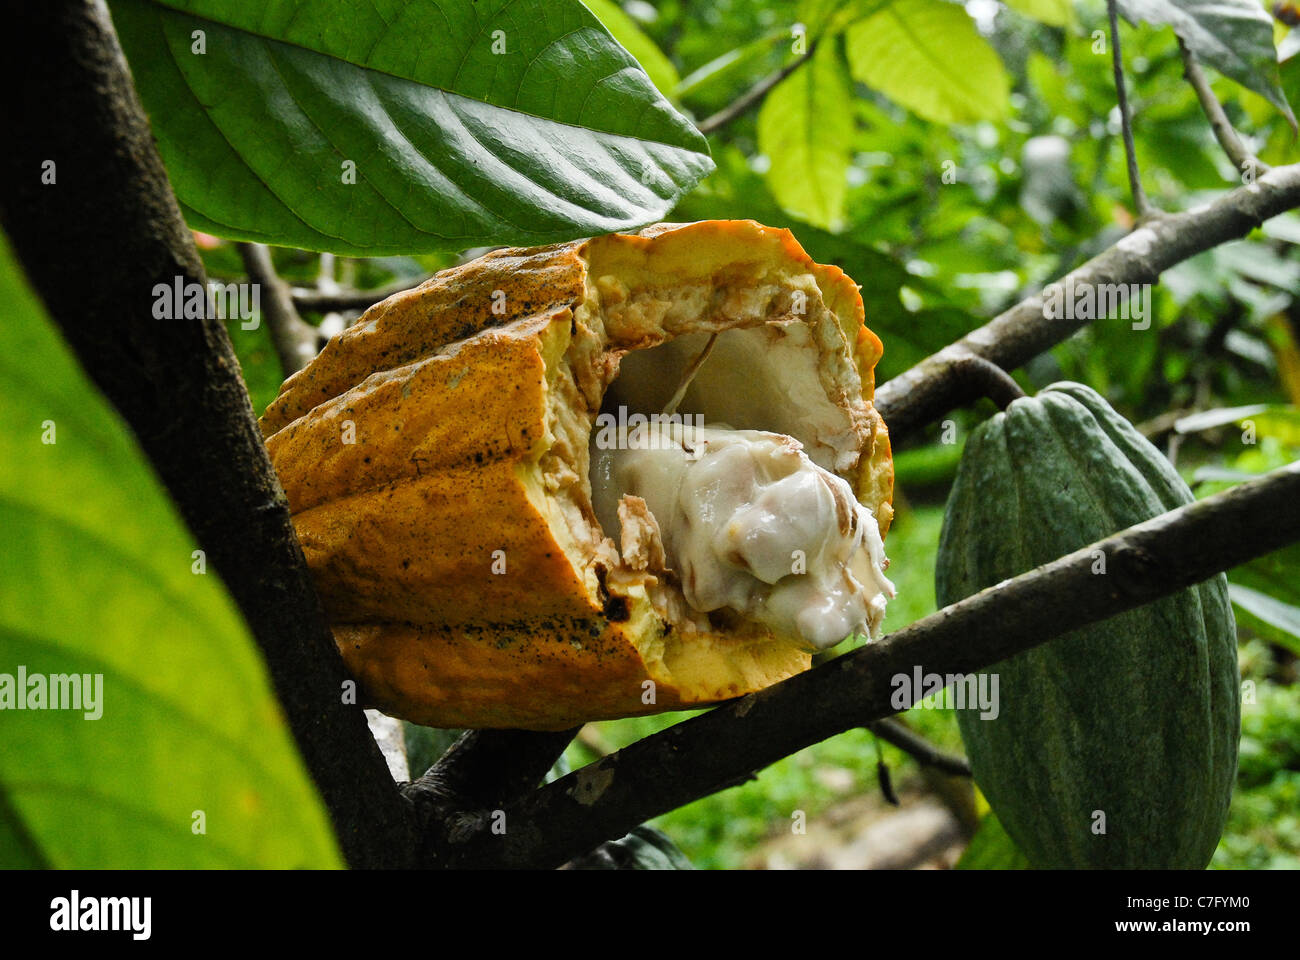 Cocoa beans in a freshly cut cocoa pod. Sao Tome and Principe, Africa. Stock Photo